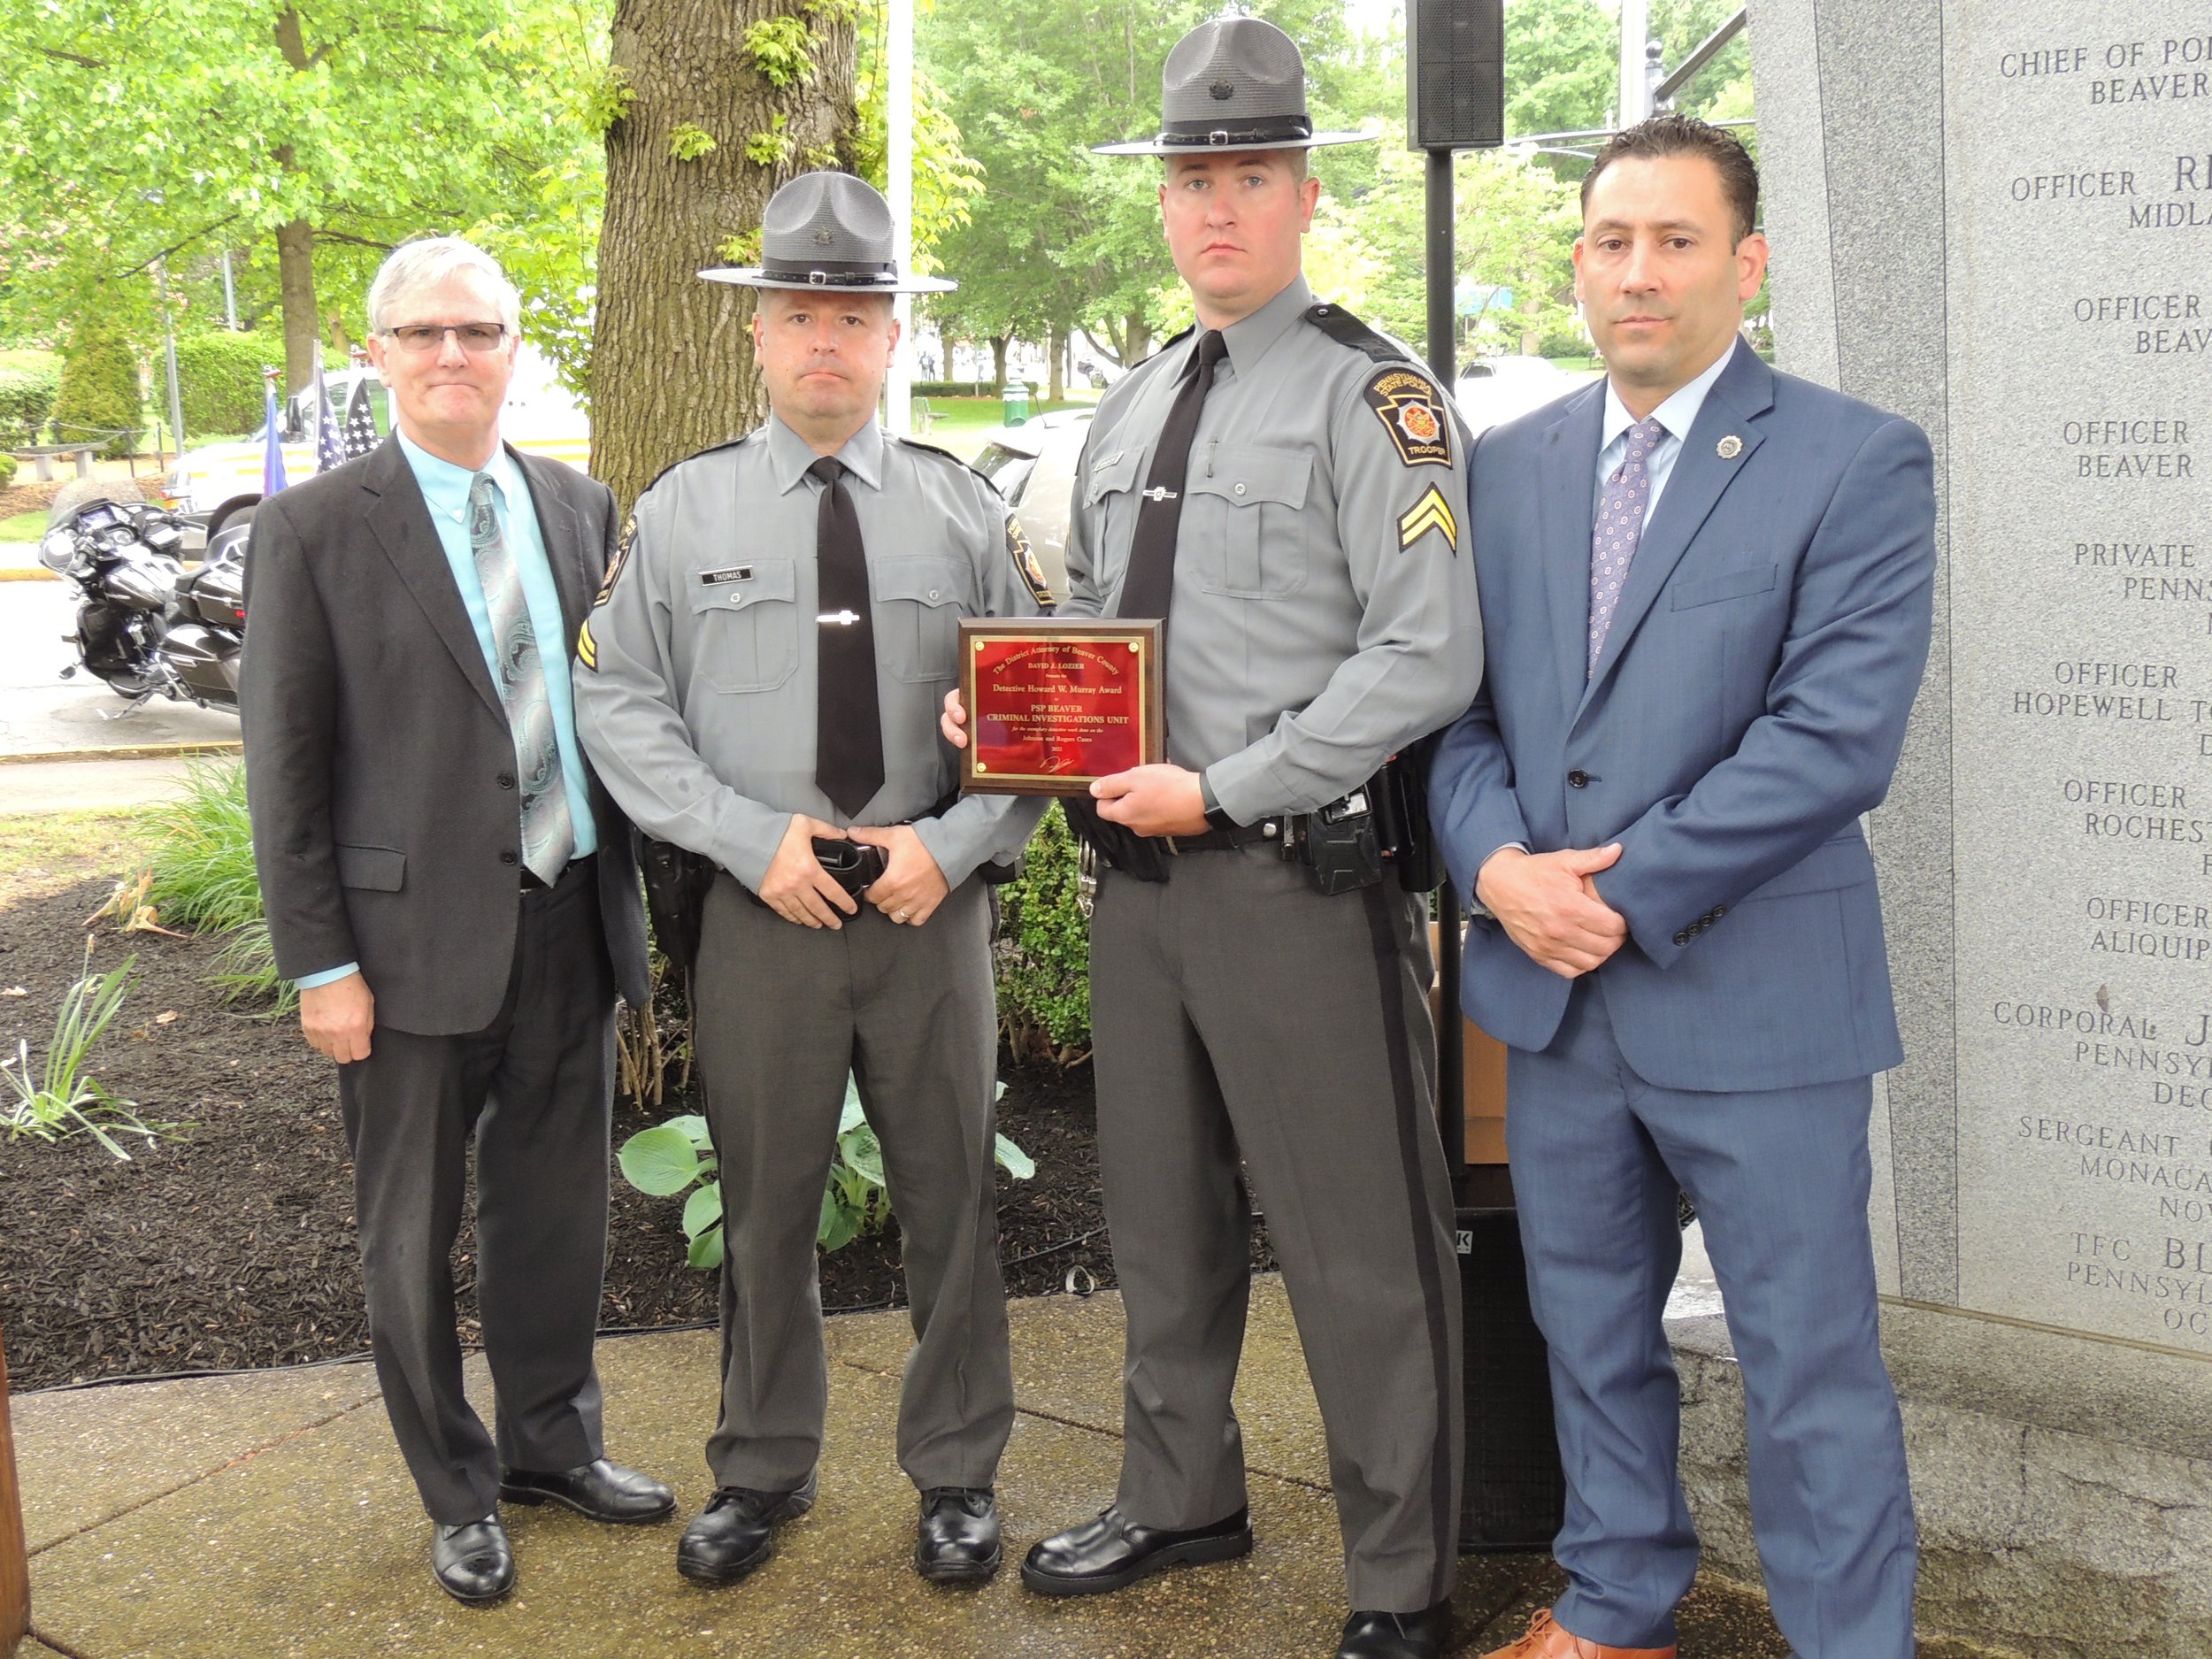 District Attorney David Lozier presents Detective Howard Murray Award to the Pennsylvania State Police Beaver Criminal Investigations Unit.